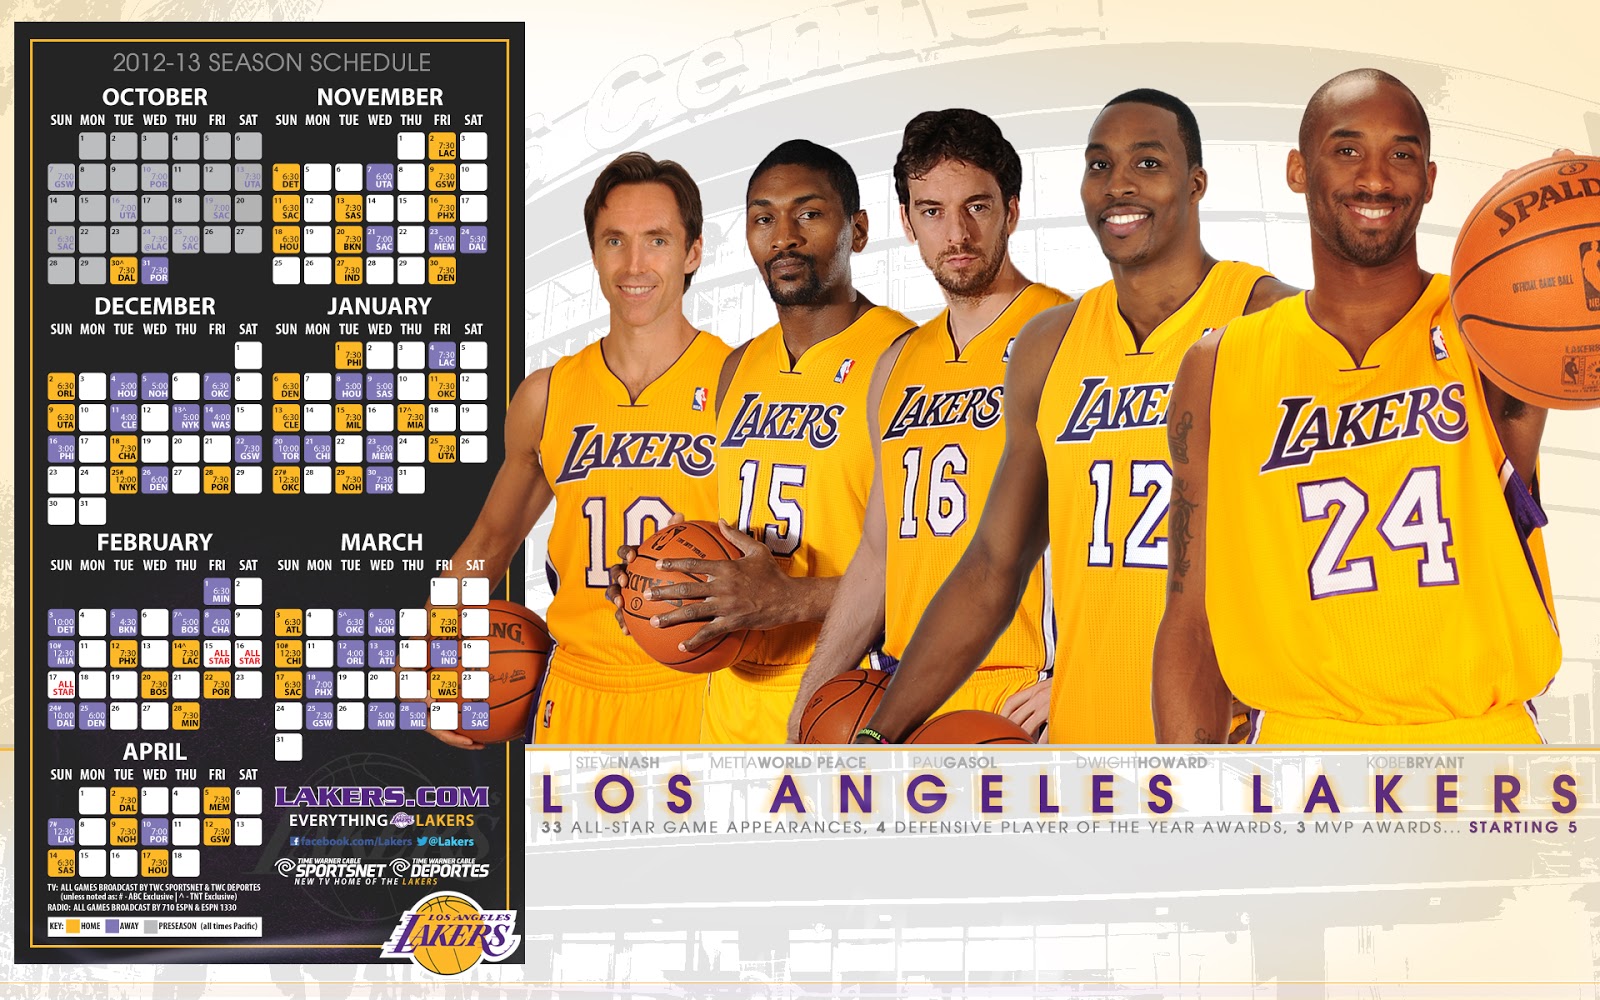 Free Wallpapers of NBA 2012-2013 New Season - Everything about PowerPoint & Wallpapers